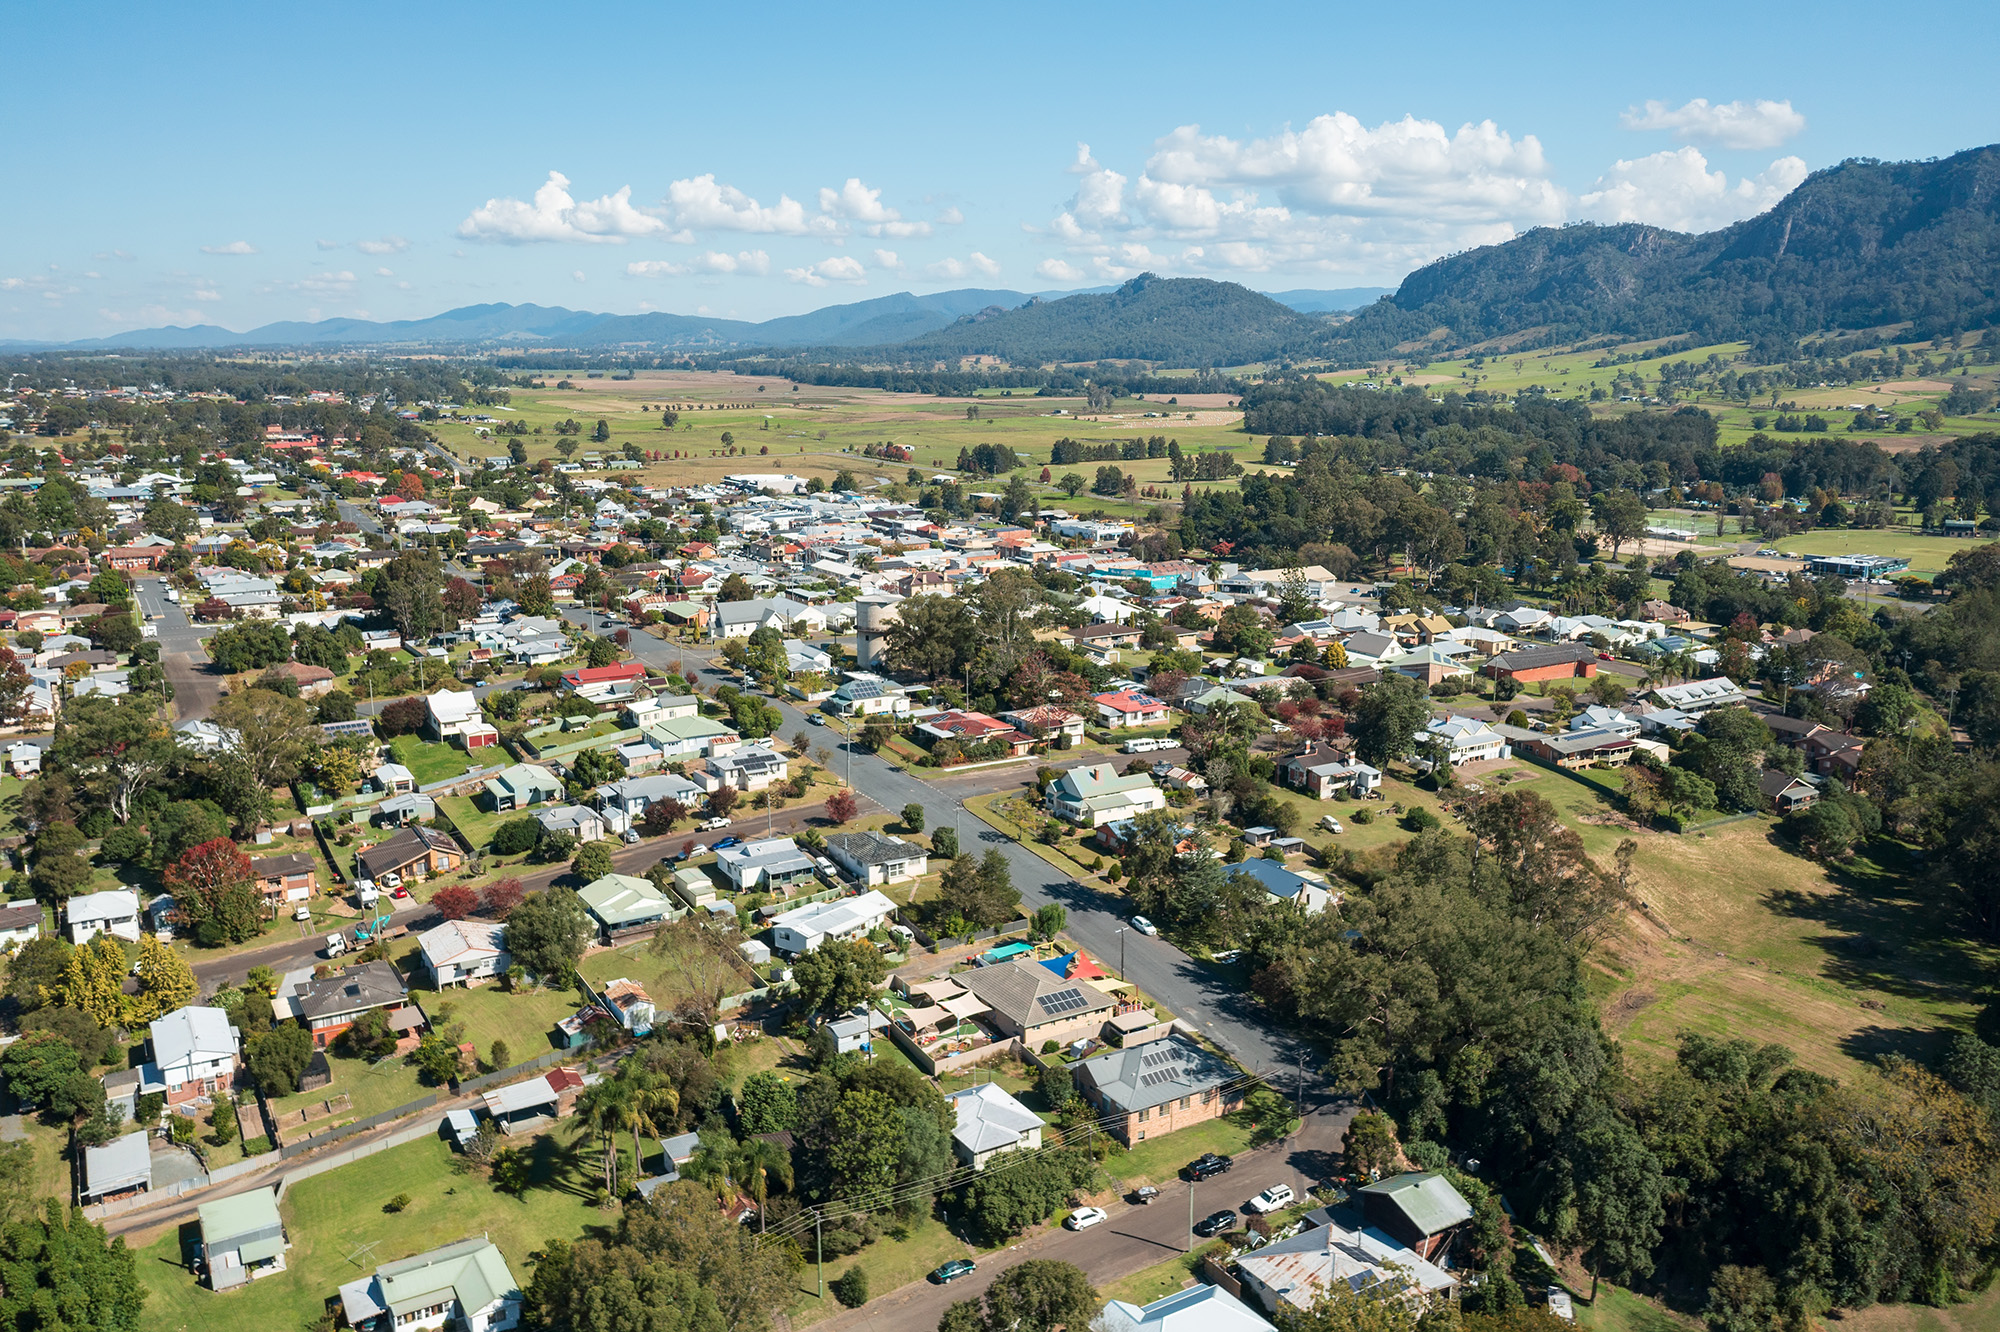 Aerial view of the town of Gloucester, Australia